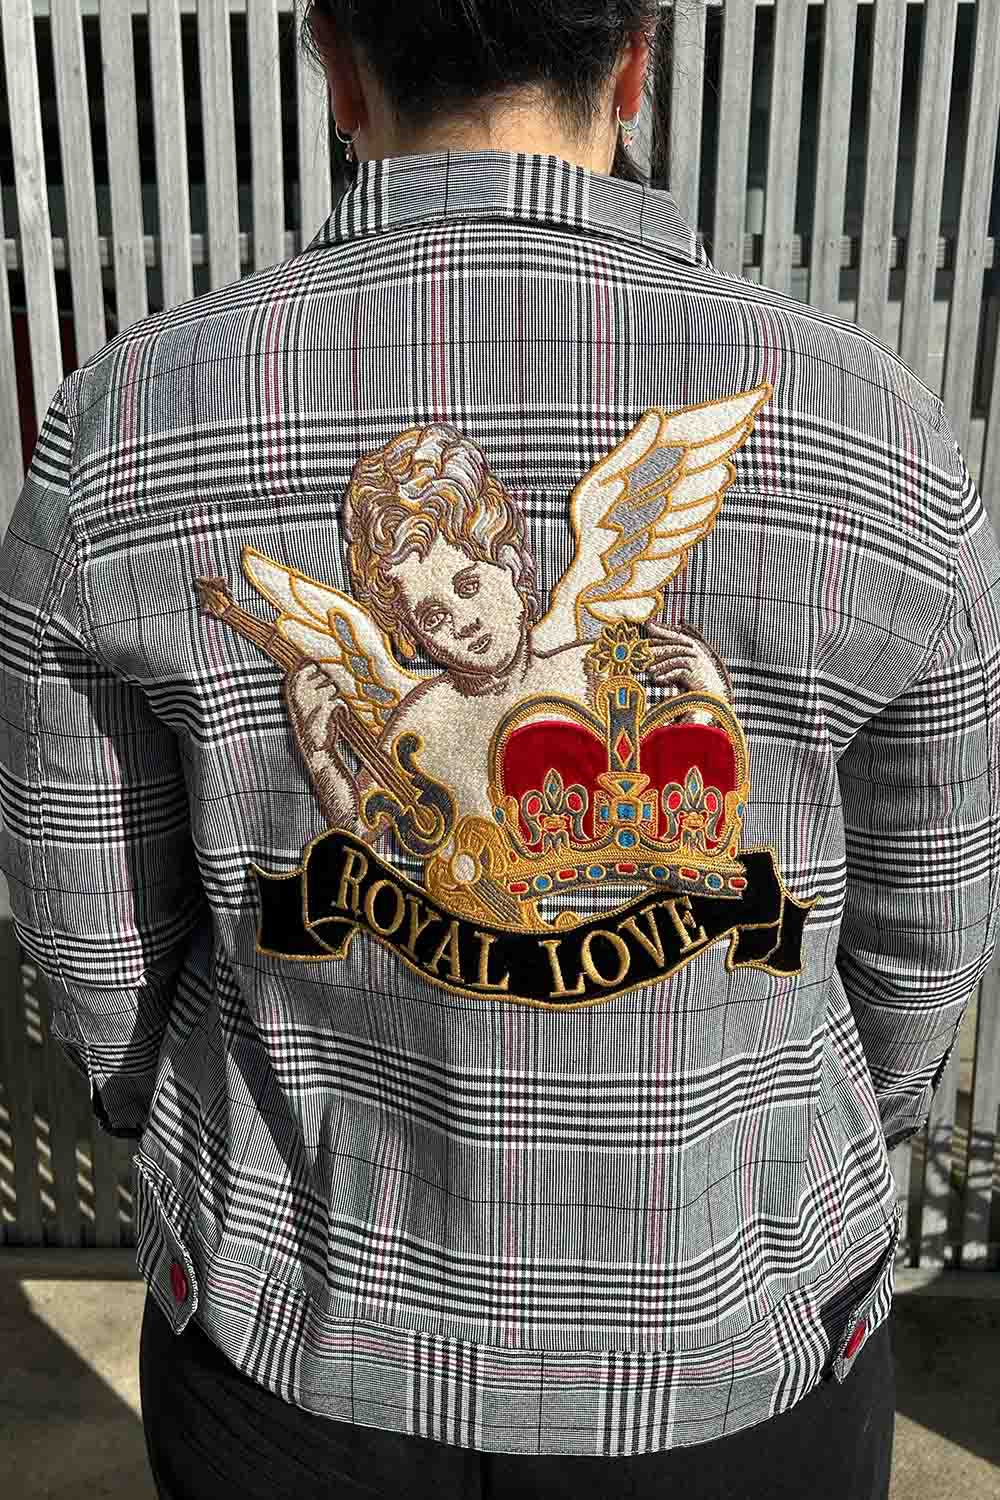 The back of the DJ Royal Love jacket showing an embossed royal love cherub design